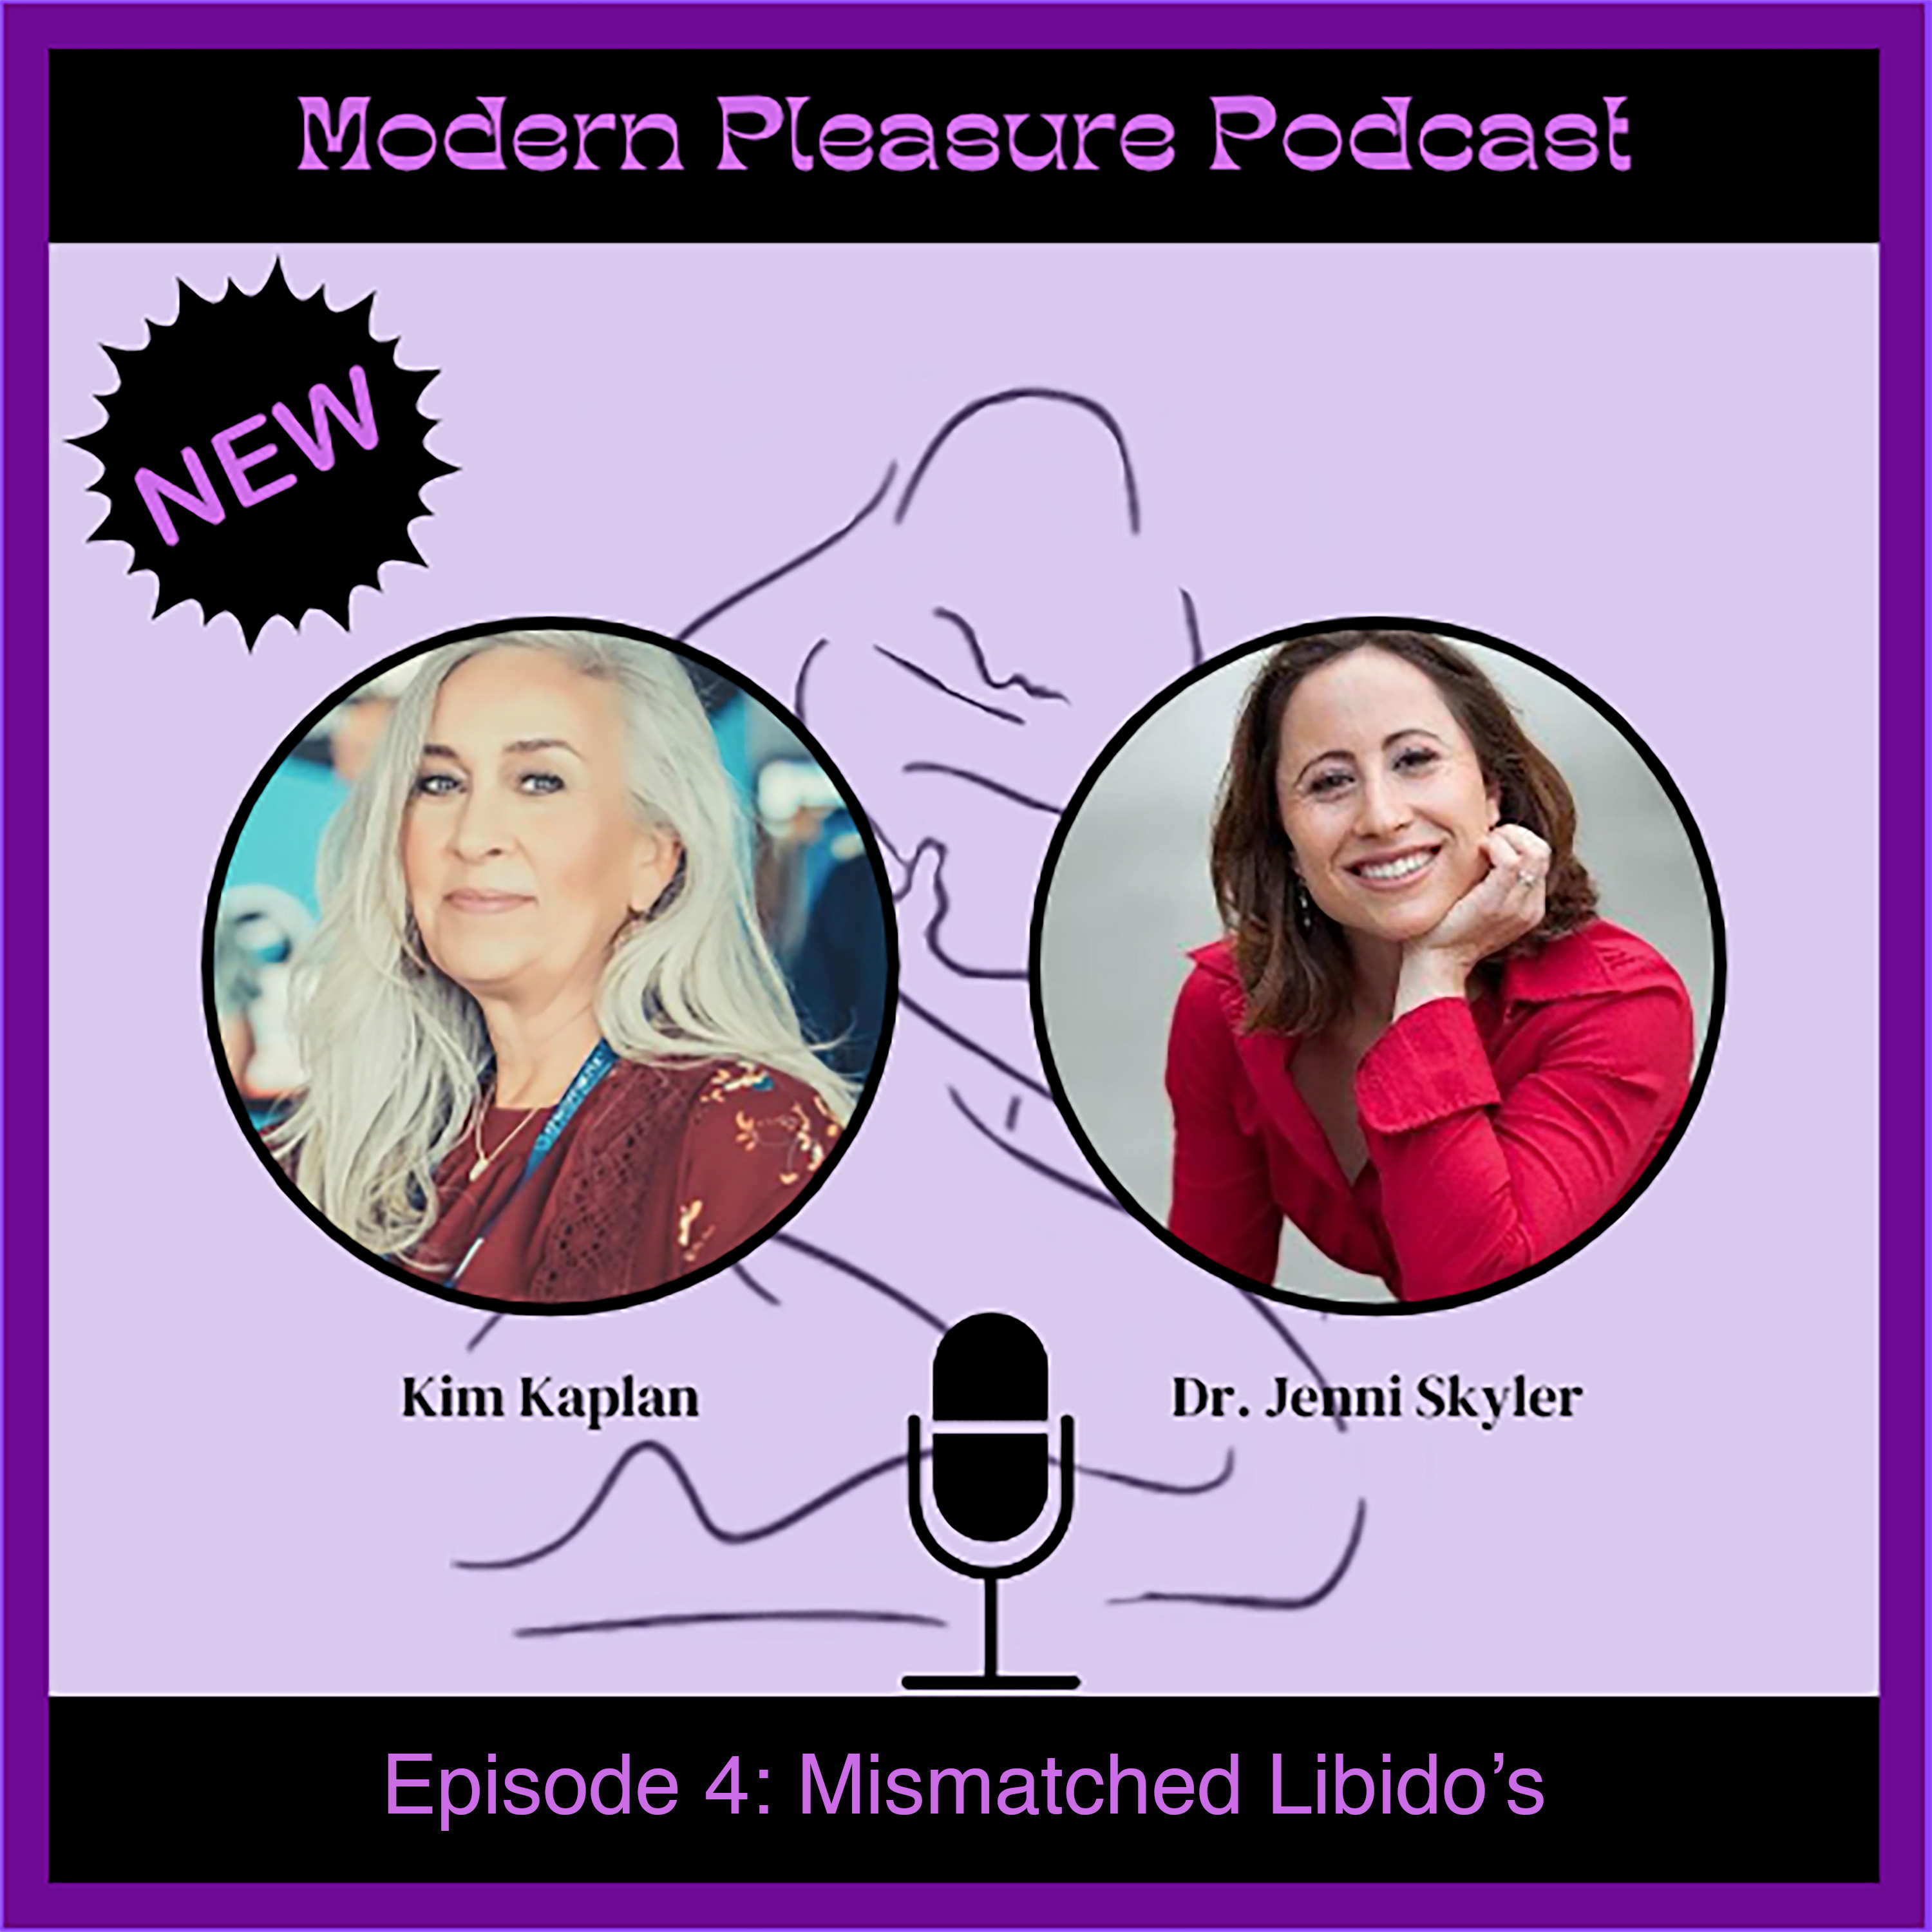 Episode 4: Mismatched Libidos - Why This Happens and How To Solve It